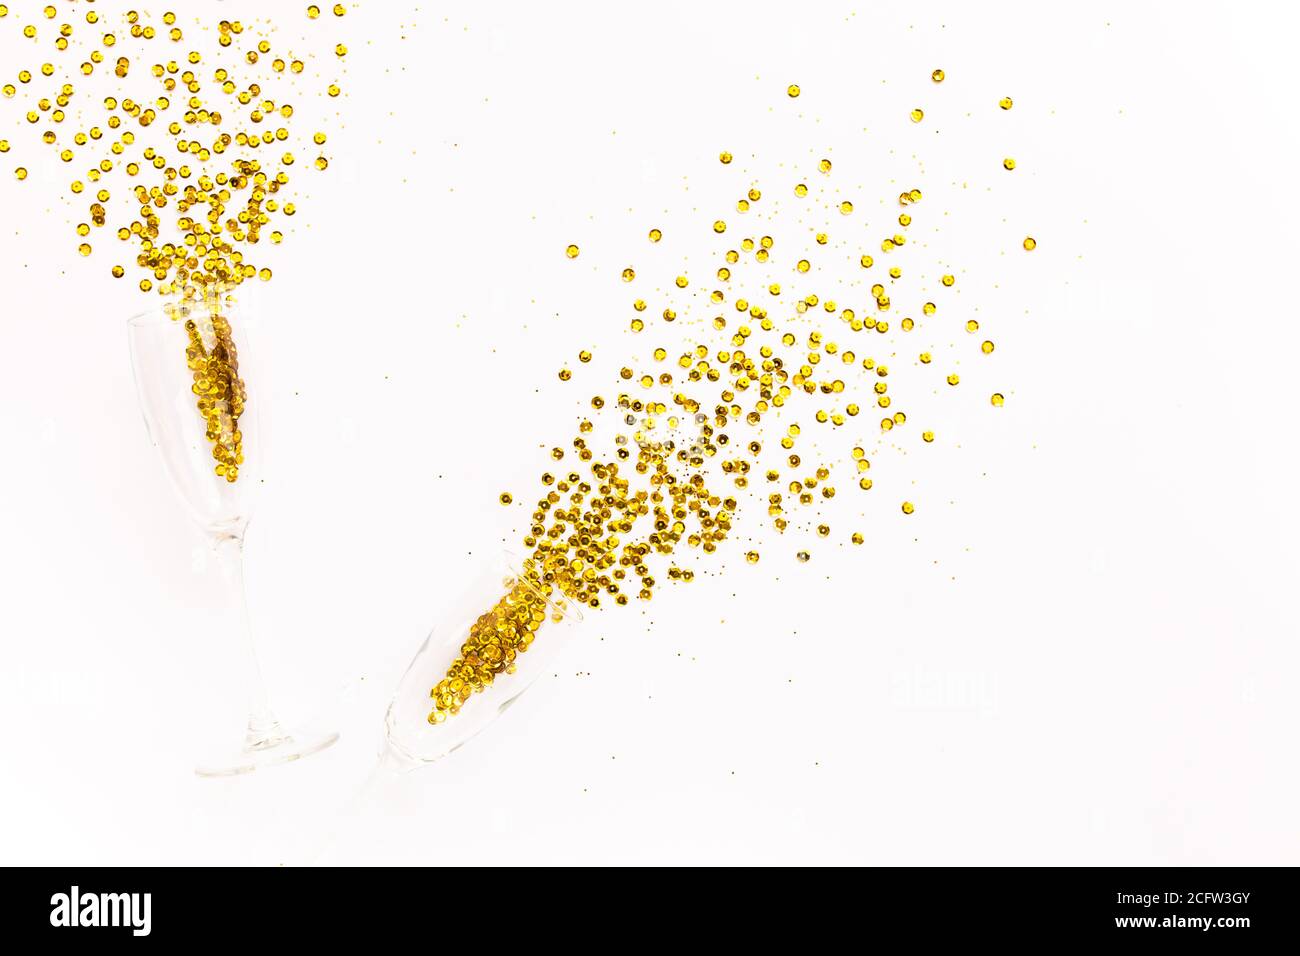 Champagne glasses with golden confetti tinsel on white background. Flat lay, top view celebrate party concept. Stock Photo